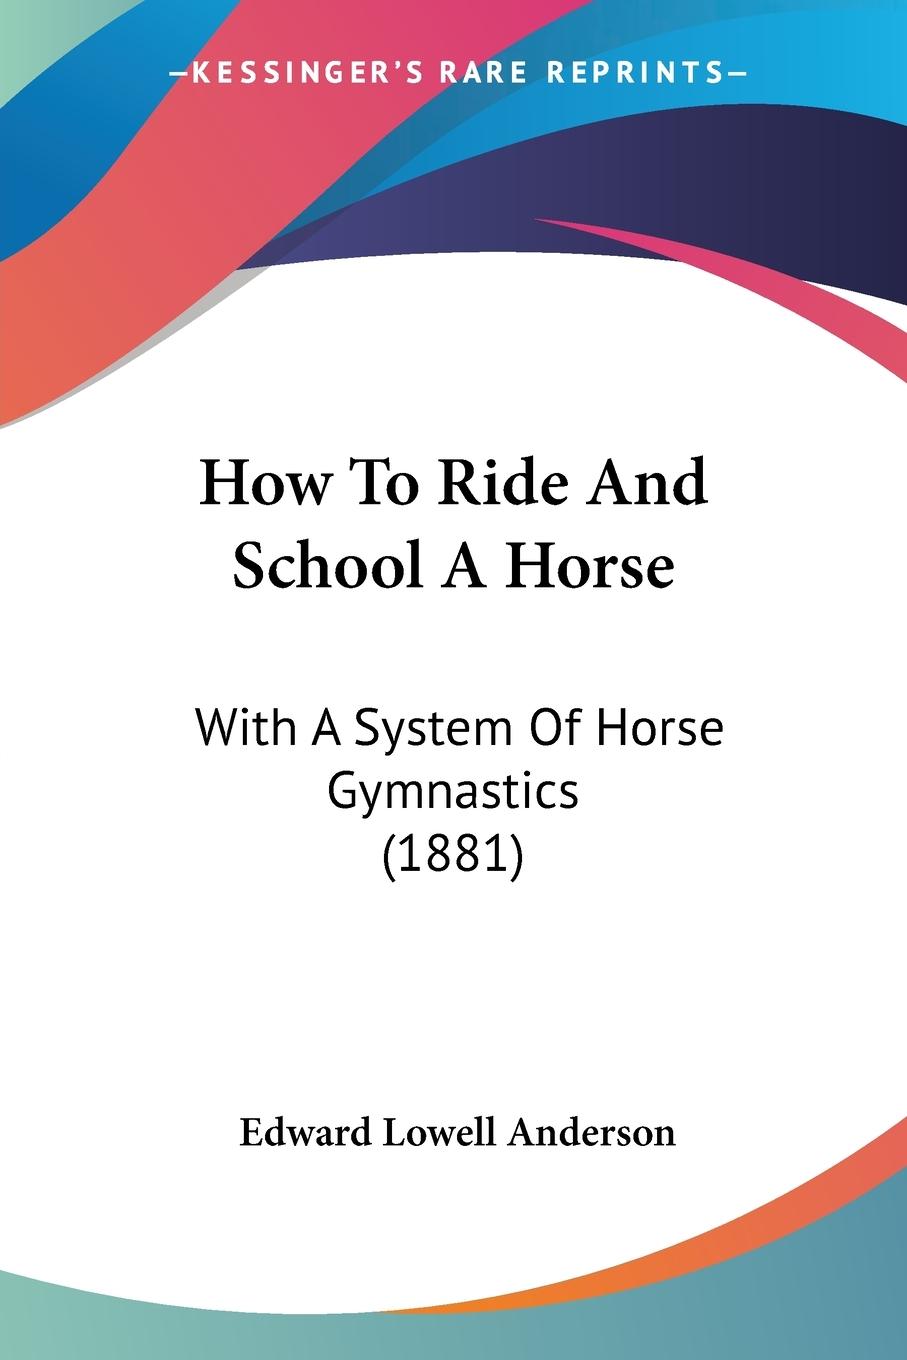 How To Ride And School A Horse - Anderson, Edward Lowell